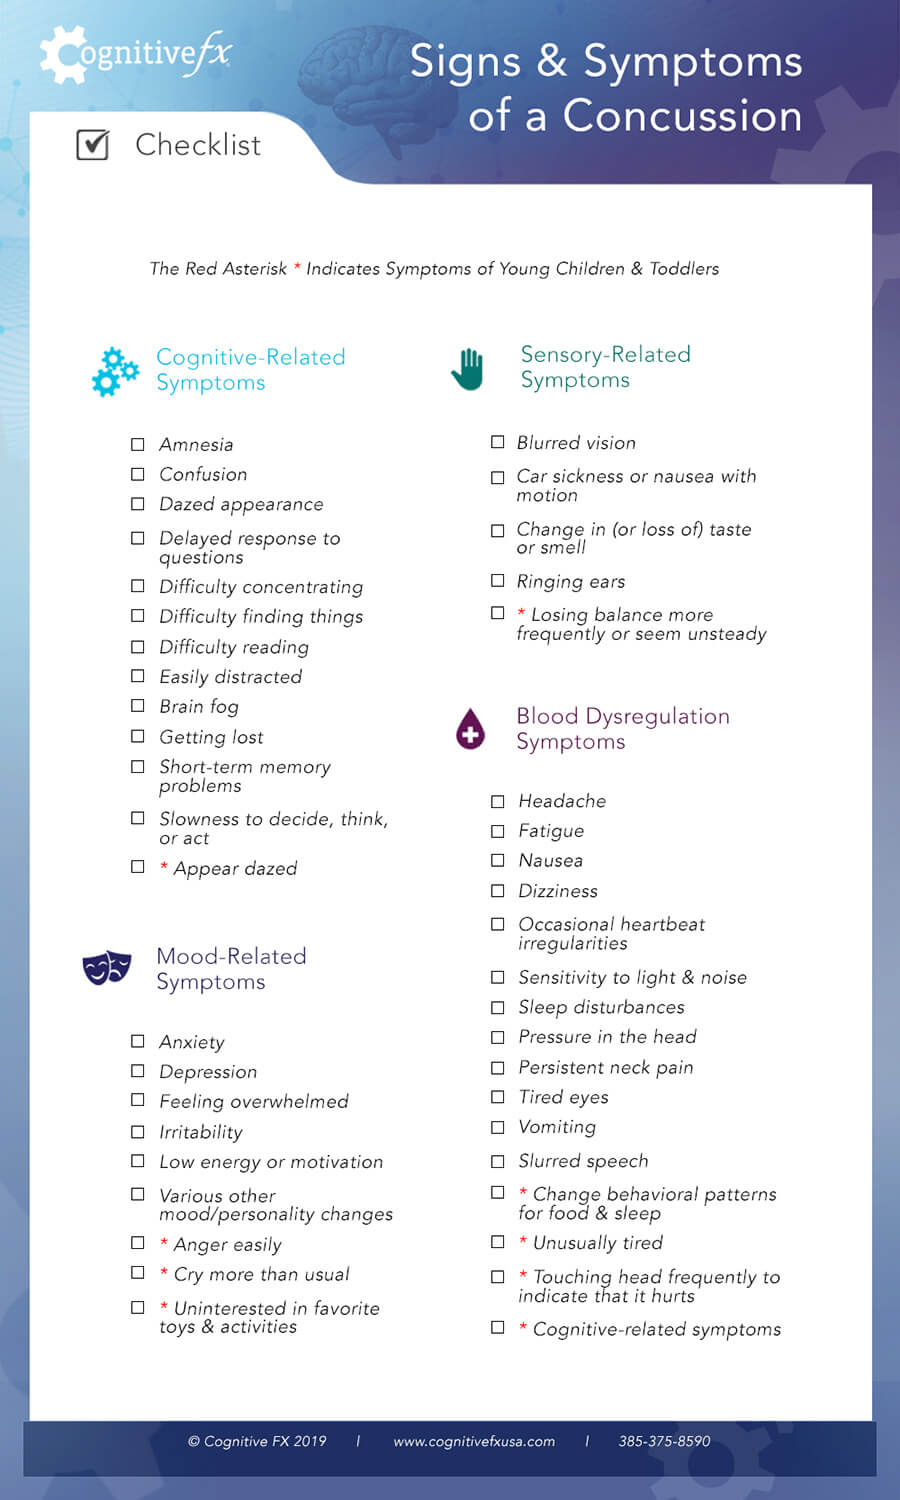 This signs and symptoms of a concussion checklist is part of a guide that answers commonly asked questions about concussion symptoms.